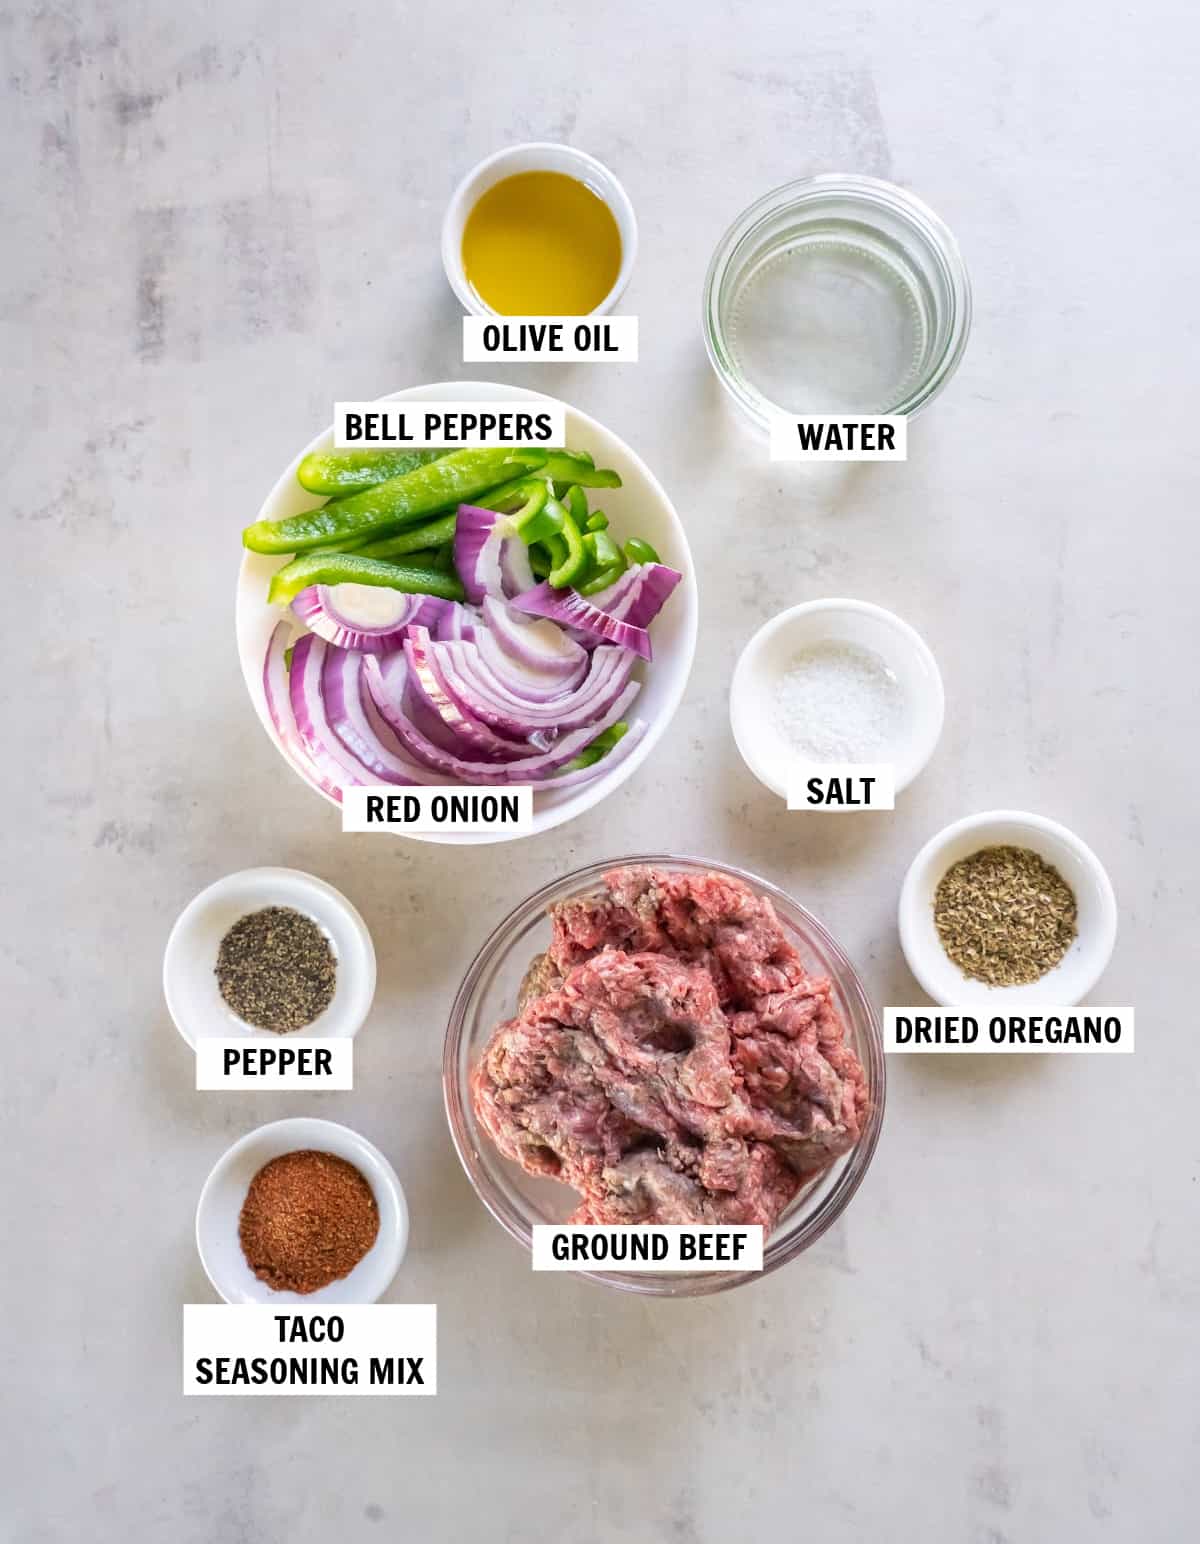 All of the ingredients for beef burrito bowls in bowls on a white countertop including olive oil, peppers and onions, salt, pepper, dried oregano, taco seasoning and ground beef.